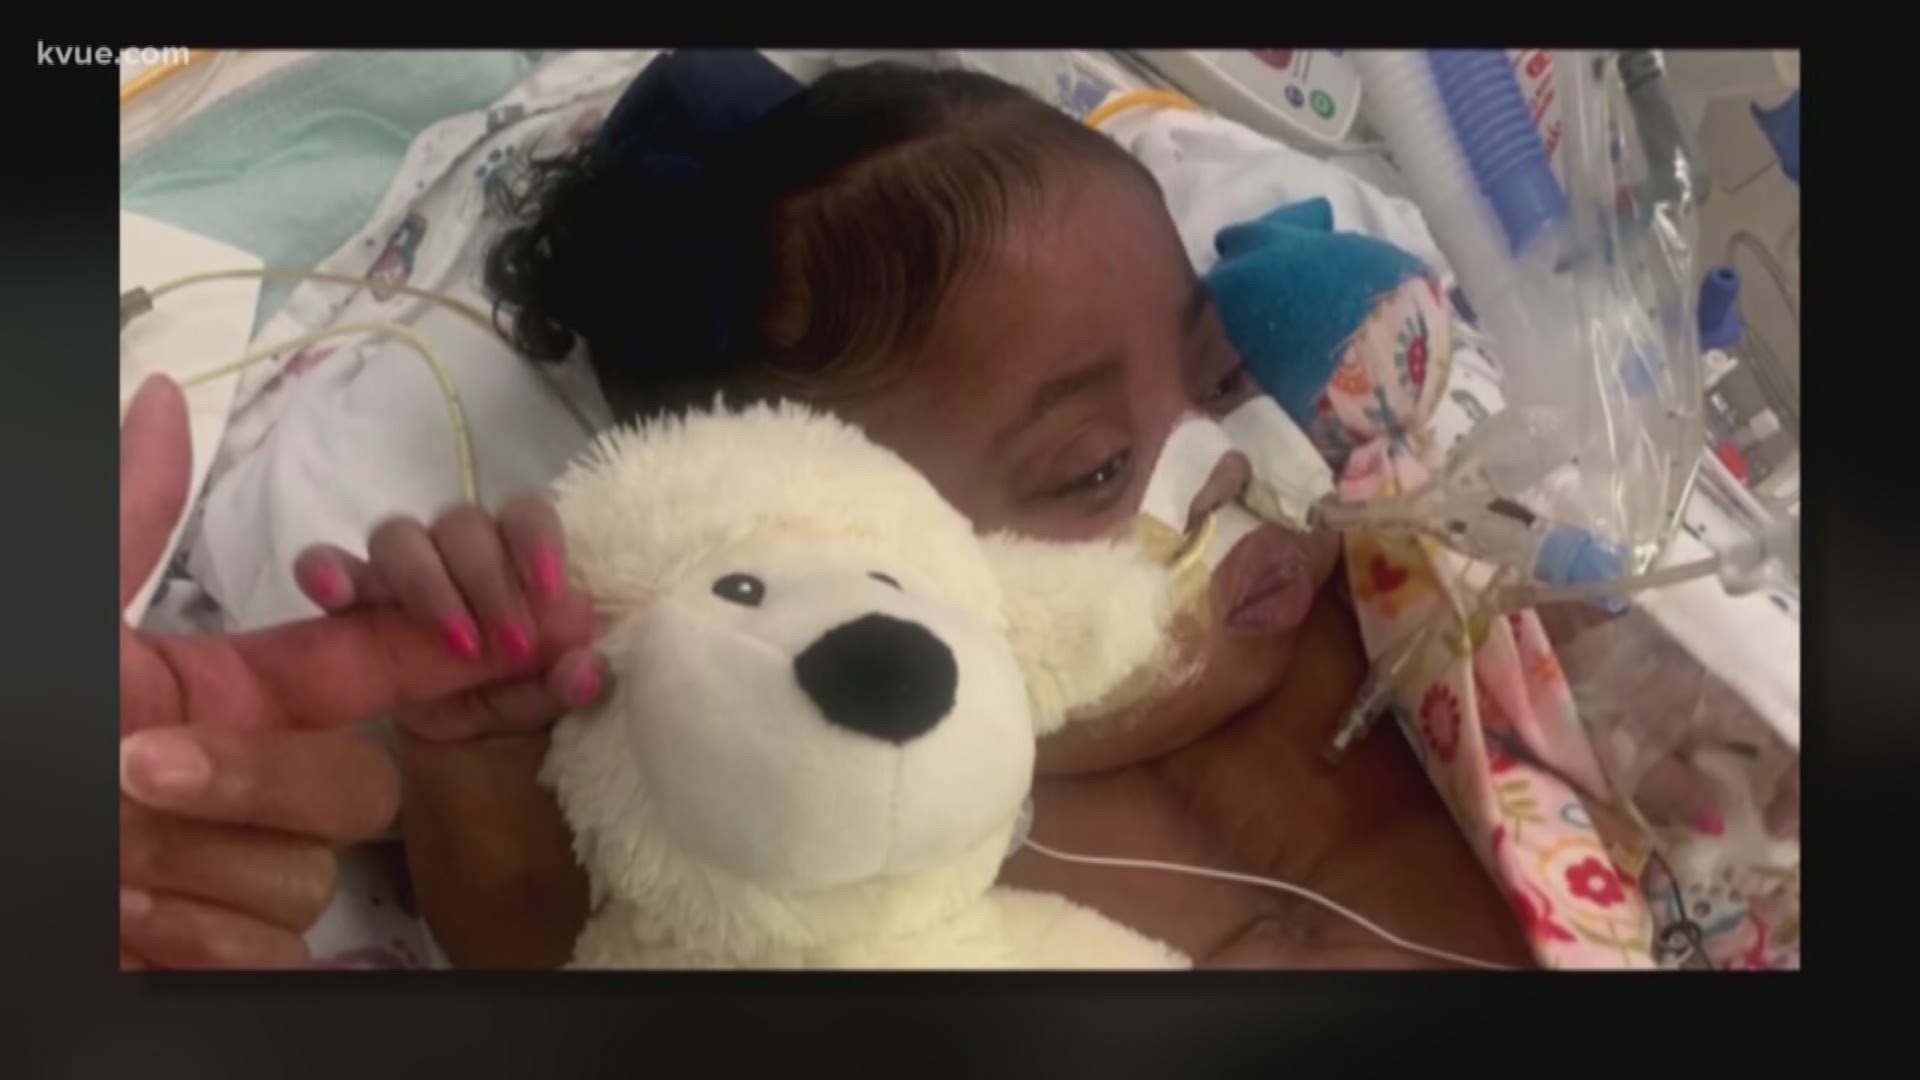 Governor Greg Abbott and Attorney General Ken Paxton are showing their support for the family of a baby girl whose doctors want to take off  life support.